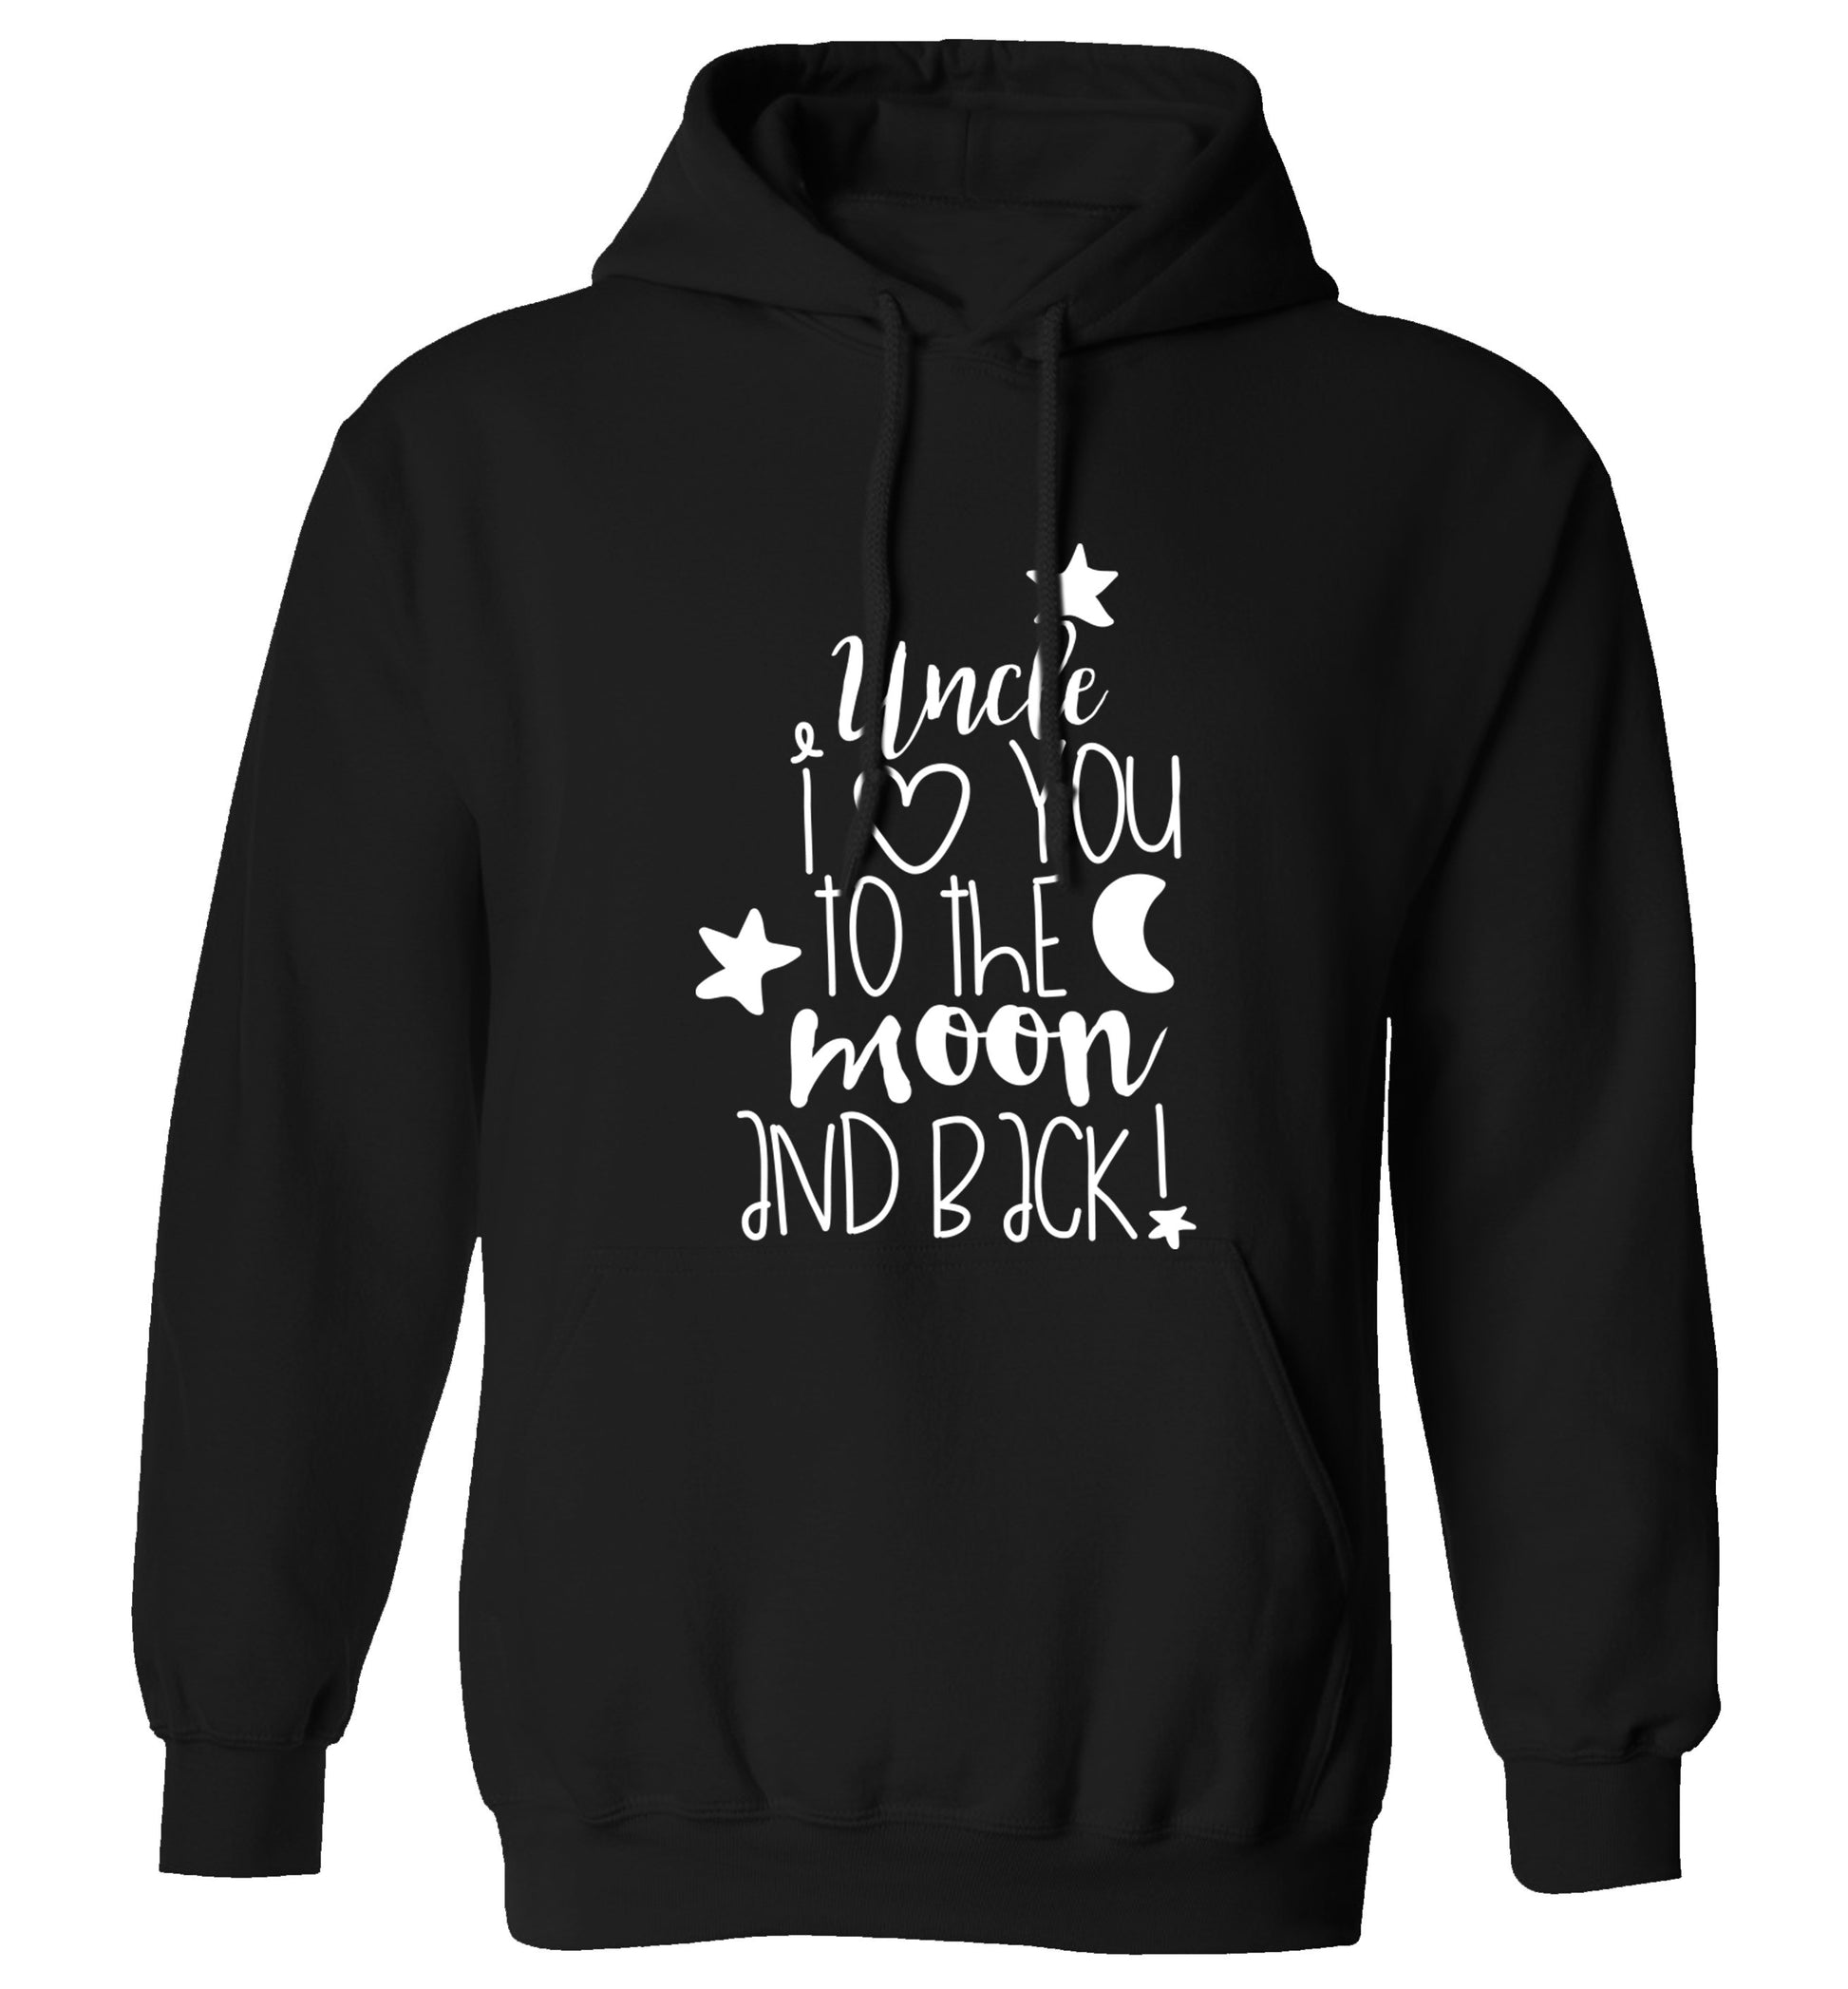 Uncle I love you to the moon and back adults unisex black hoodie 2XL